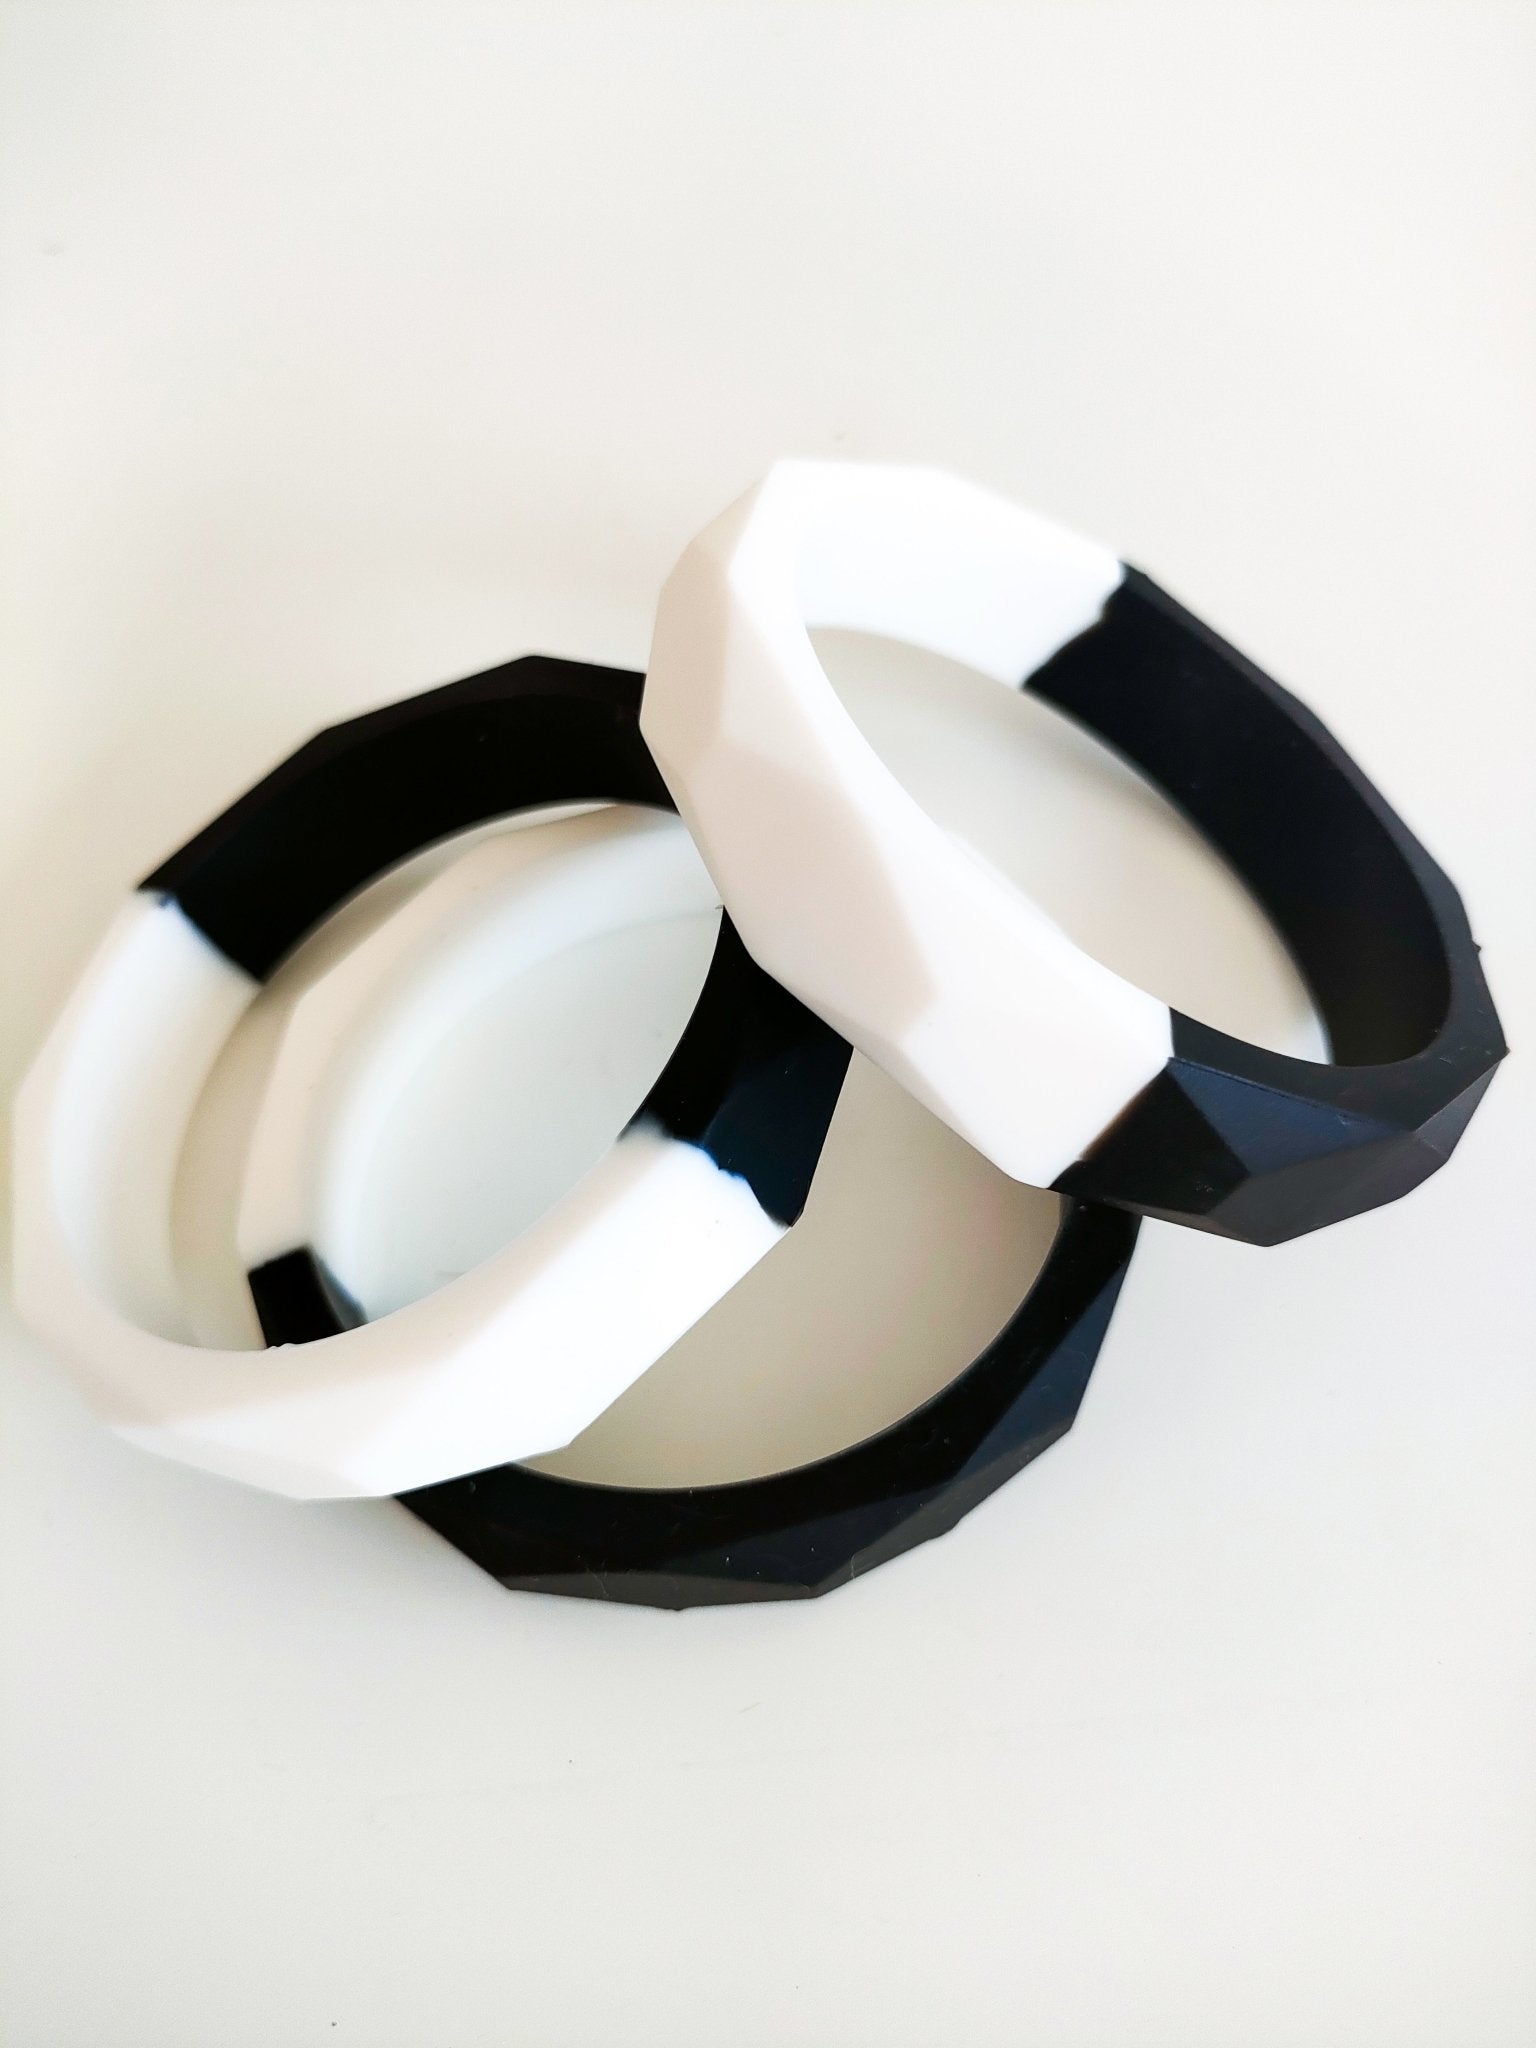 Teething Bangle Silicone Bracelet - Bennie Blooms Breastfeeding, Teething and Fiddle Jewellery at its finest.